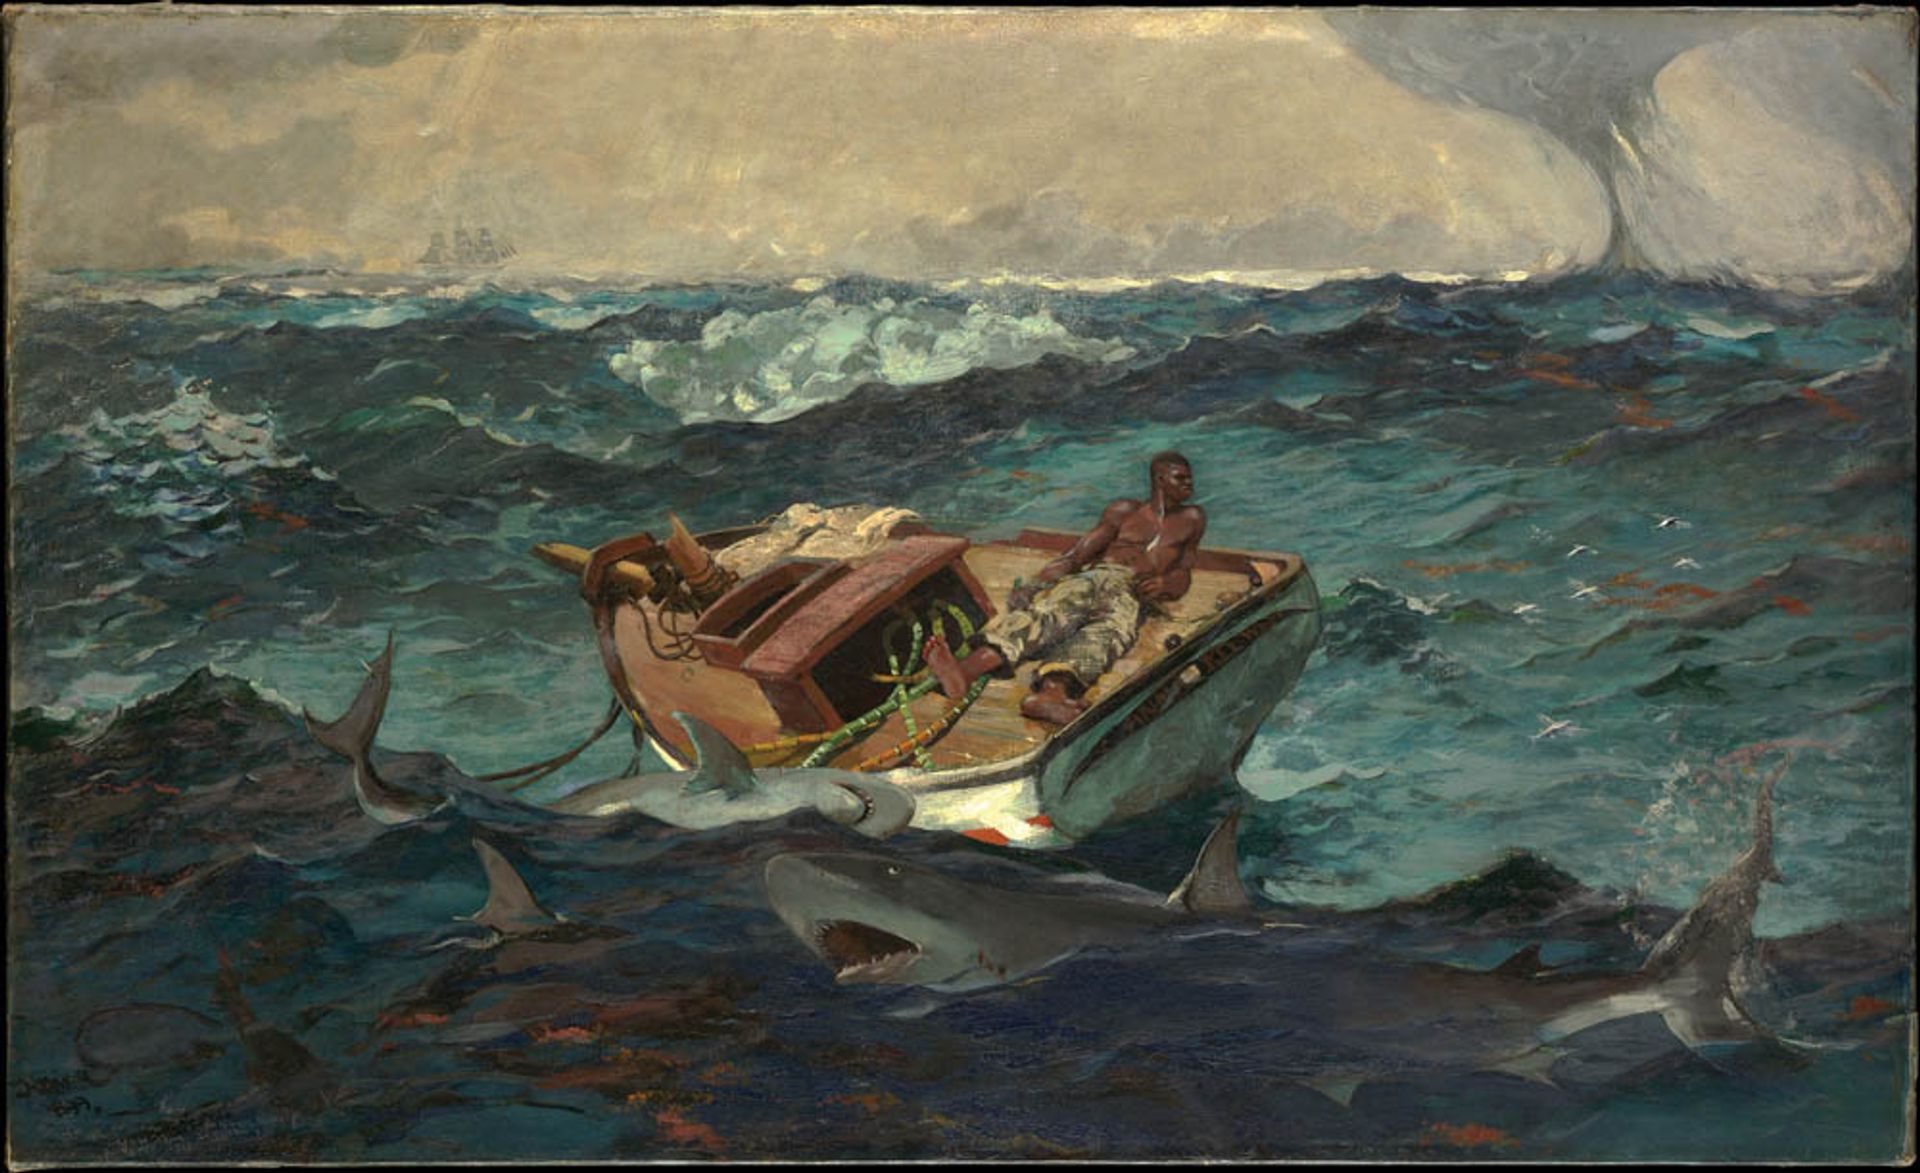 Winslow Homer’s The Gulf Stream (1899), regarded as “too anecdotal” during the artist’s lifetime, serves as a starting point for the show Courtesy of Metropolitan Museum of Art